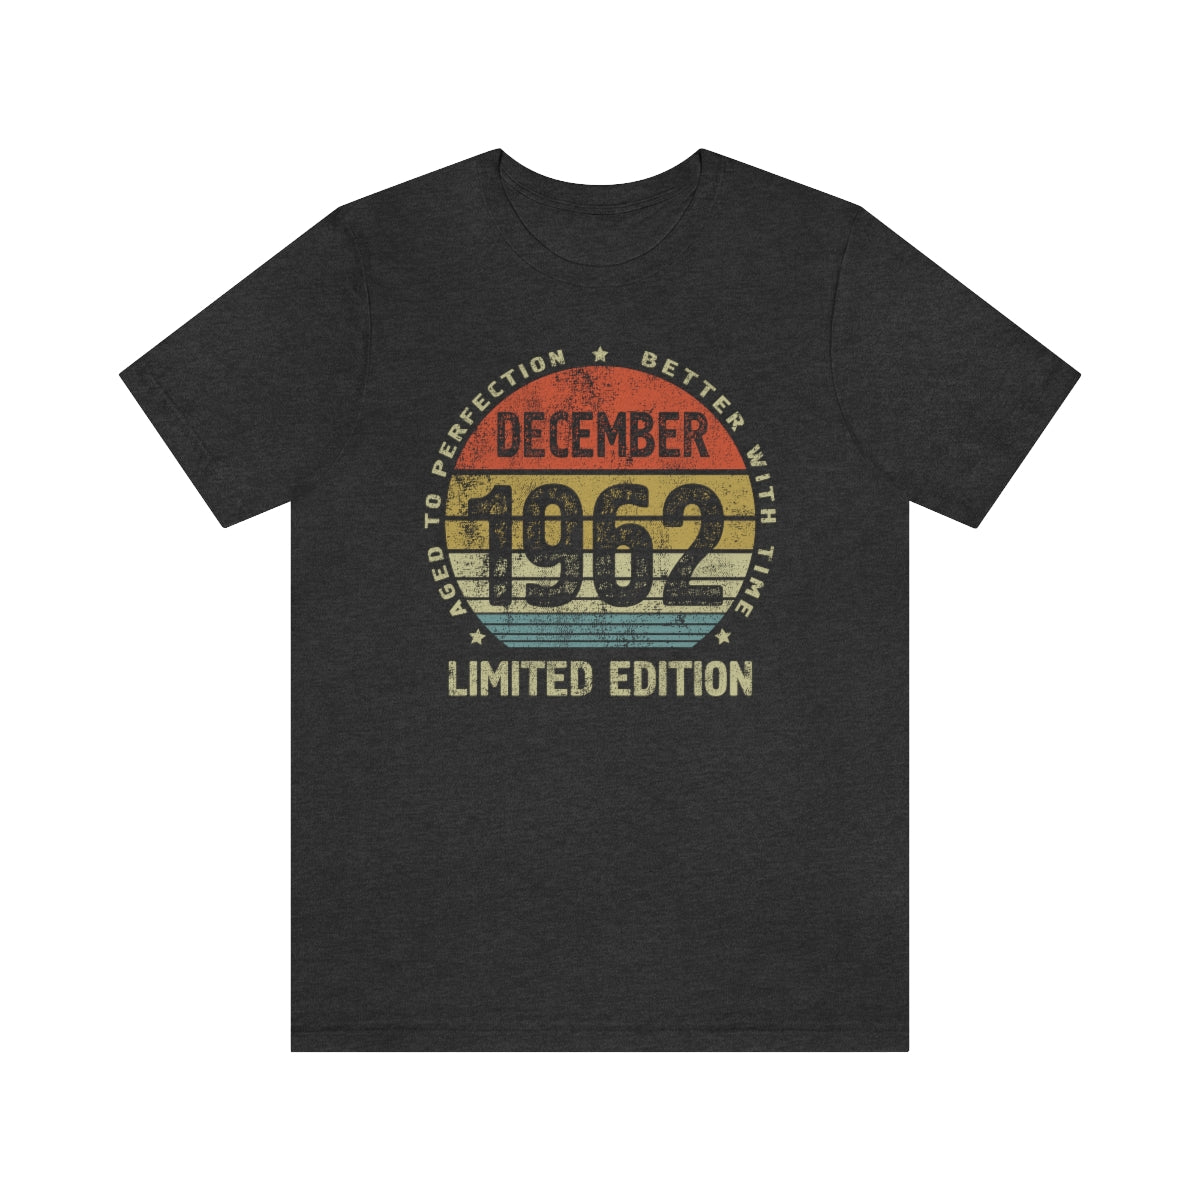 60th birthday gifts for women or men, December 1962 Shirt for wife or husband, Aged to Perfection Better with Time - 37 Design Unit